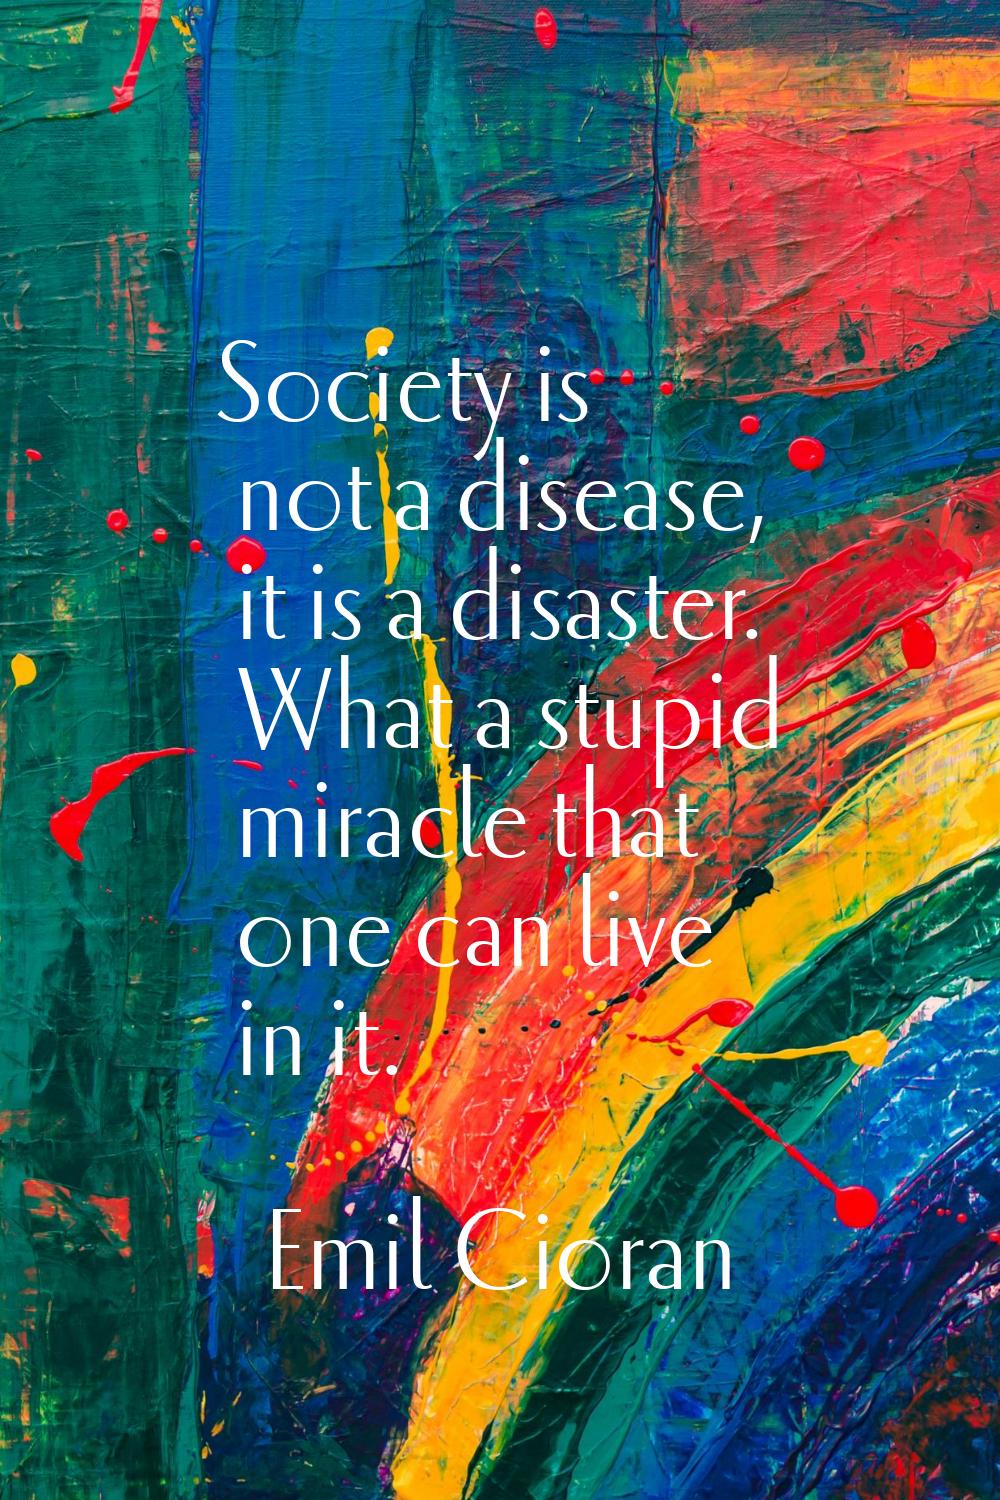 Society is not a disease, it is a disaster. What a stupid miracle that one can live in it.